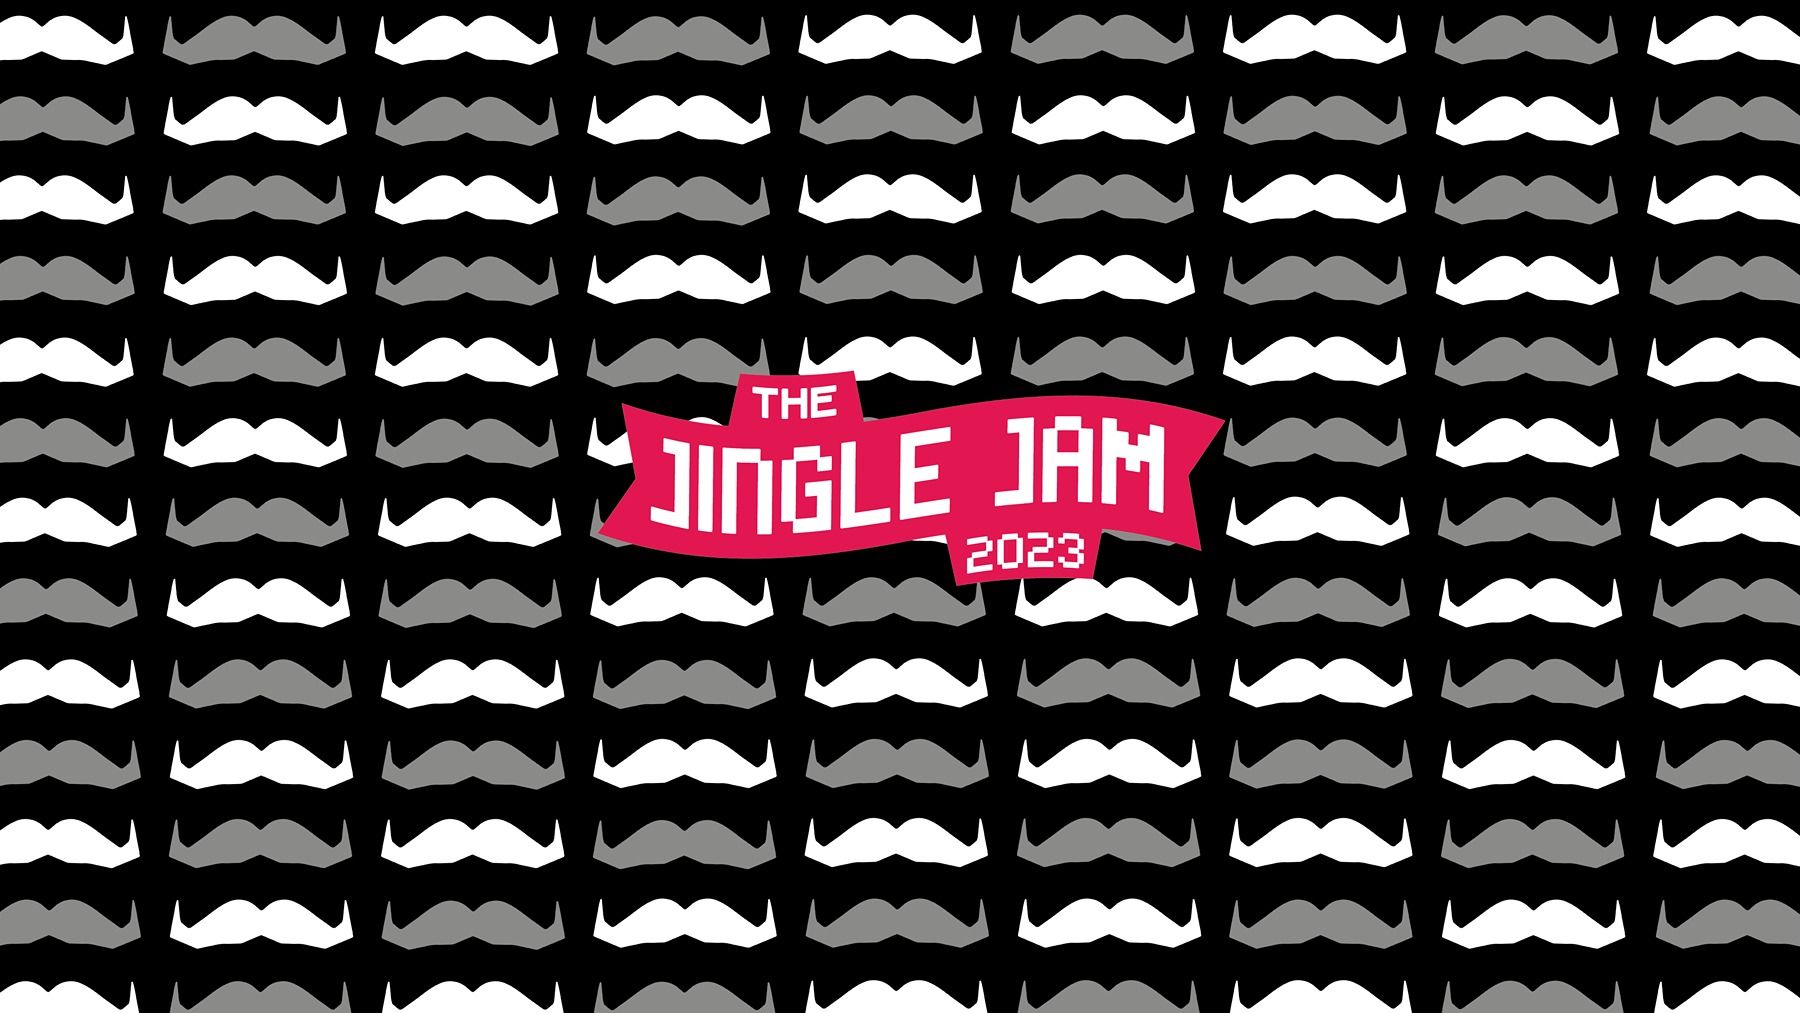 Graphic showing stylised moustache logos. Superimposed are the words: "THE JINGLE JAM 2023"